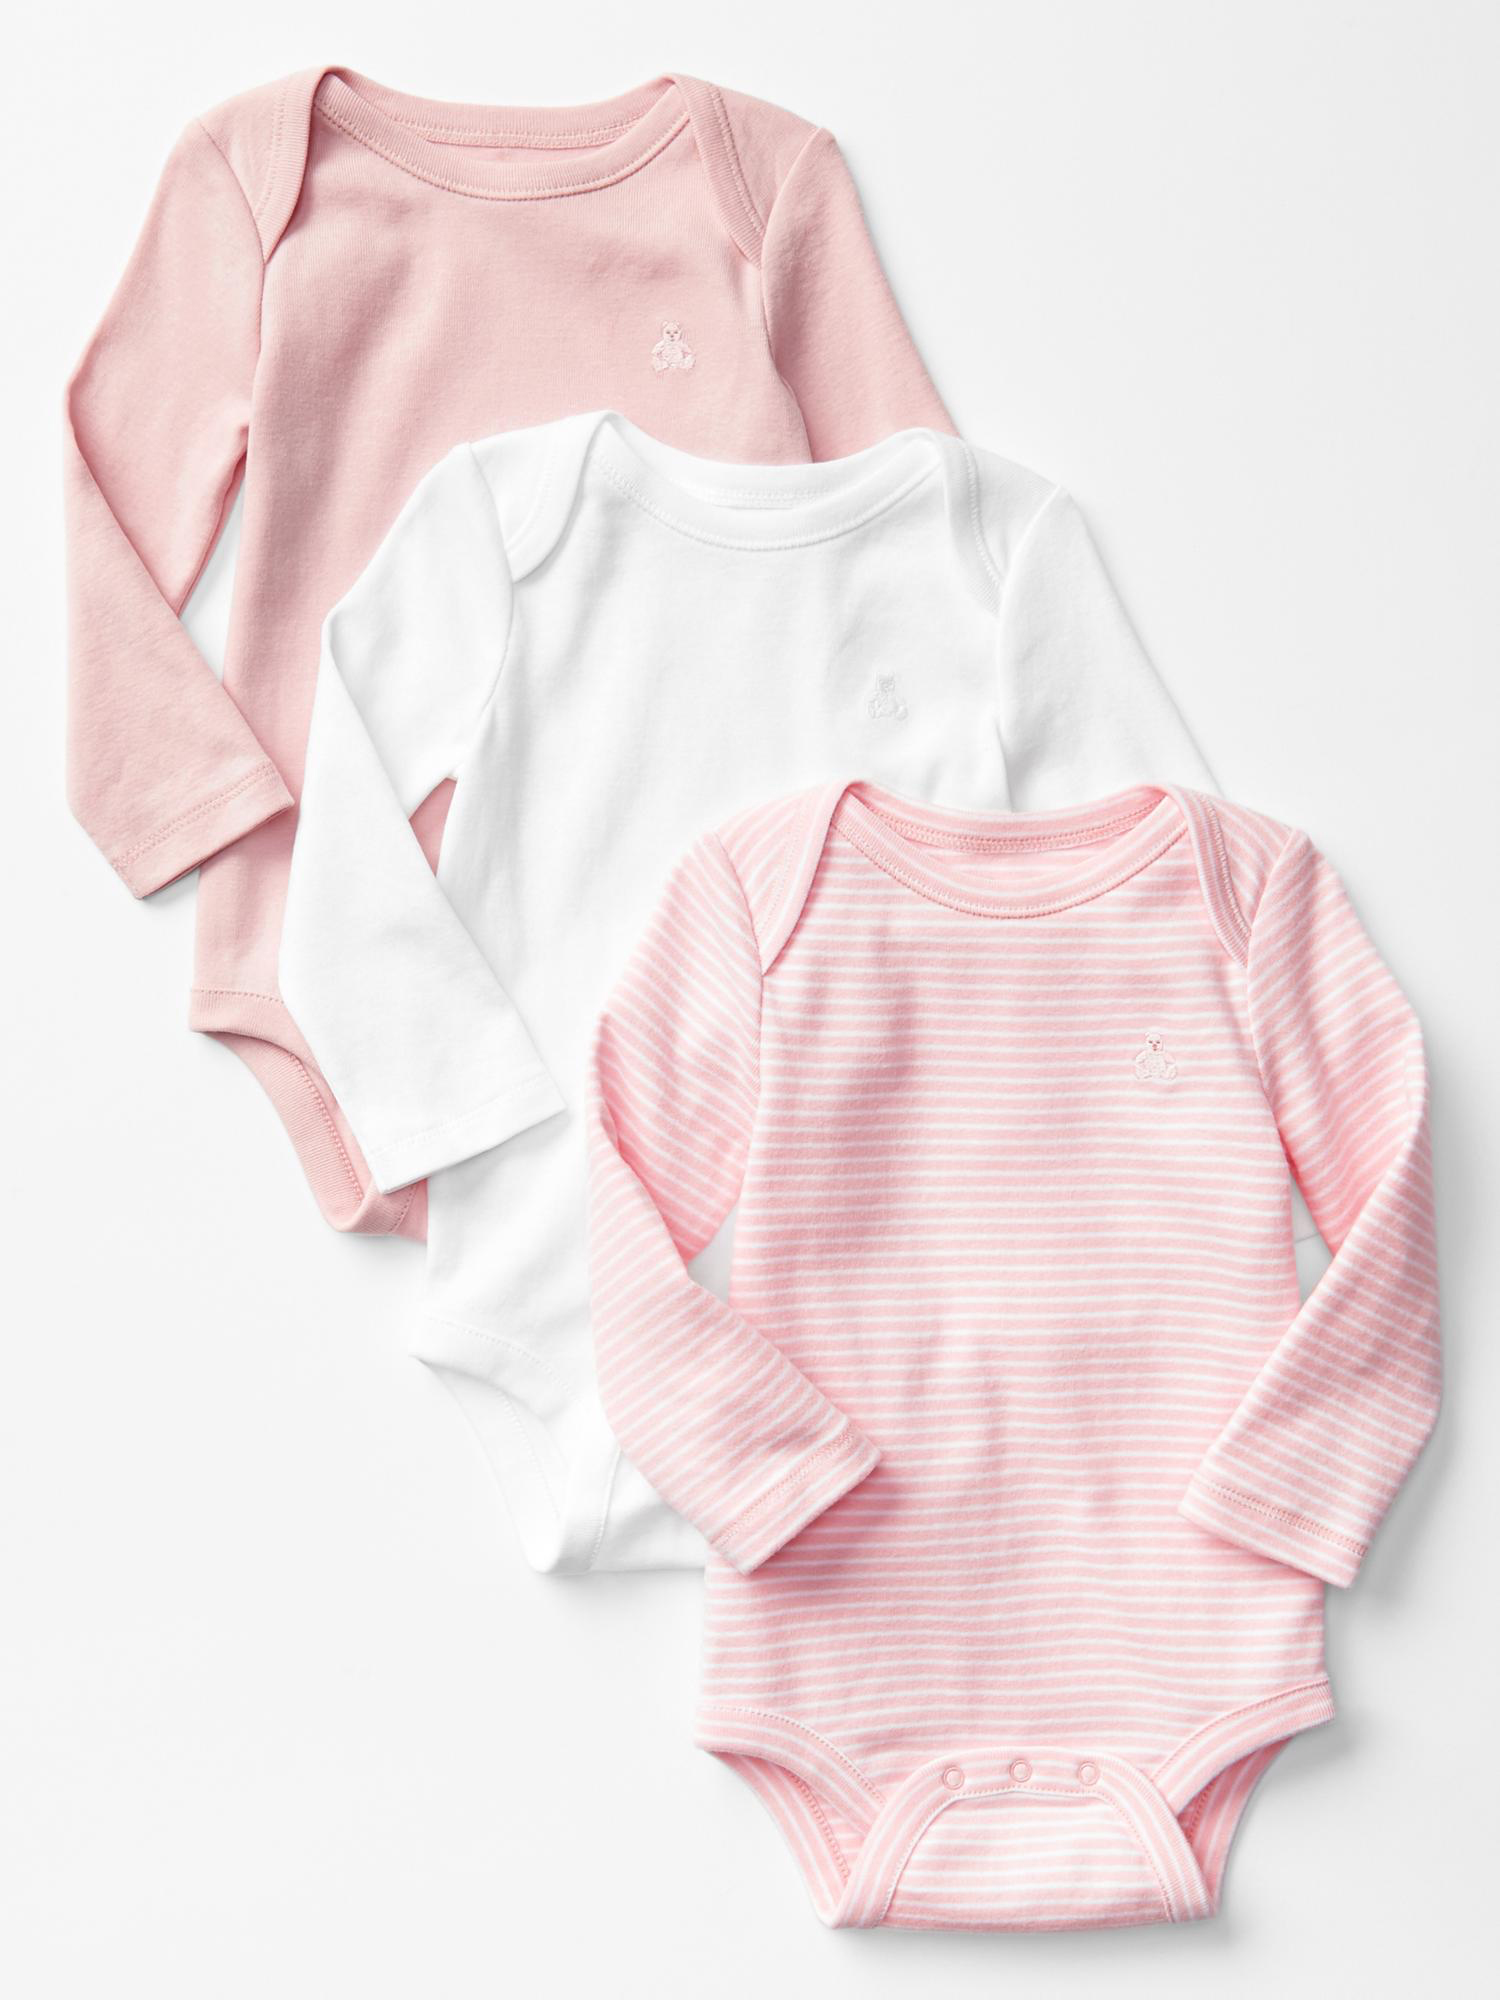 Long-Sleeve Bodysuits from Baby Gap